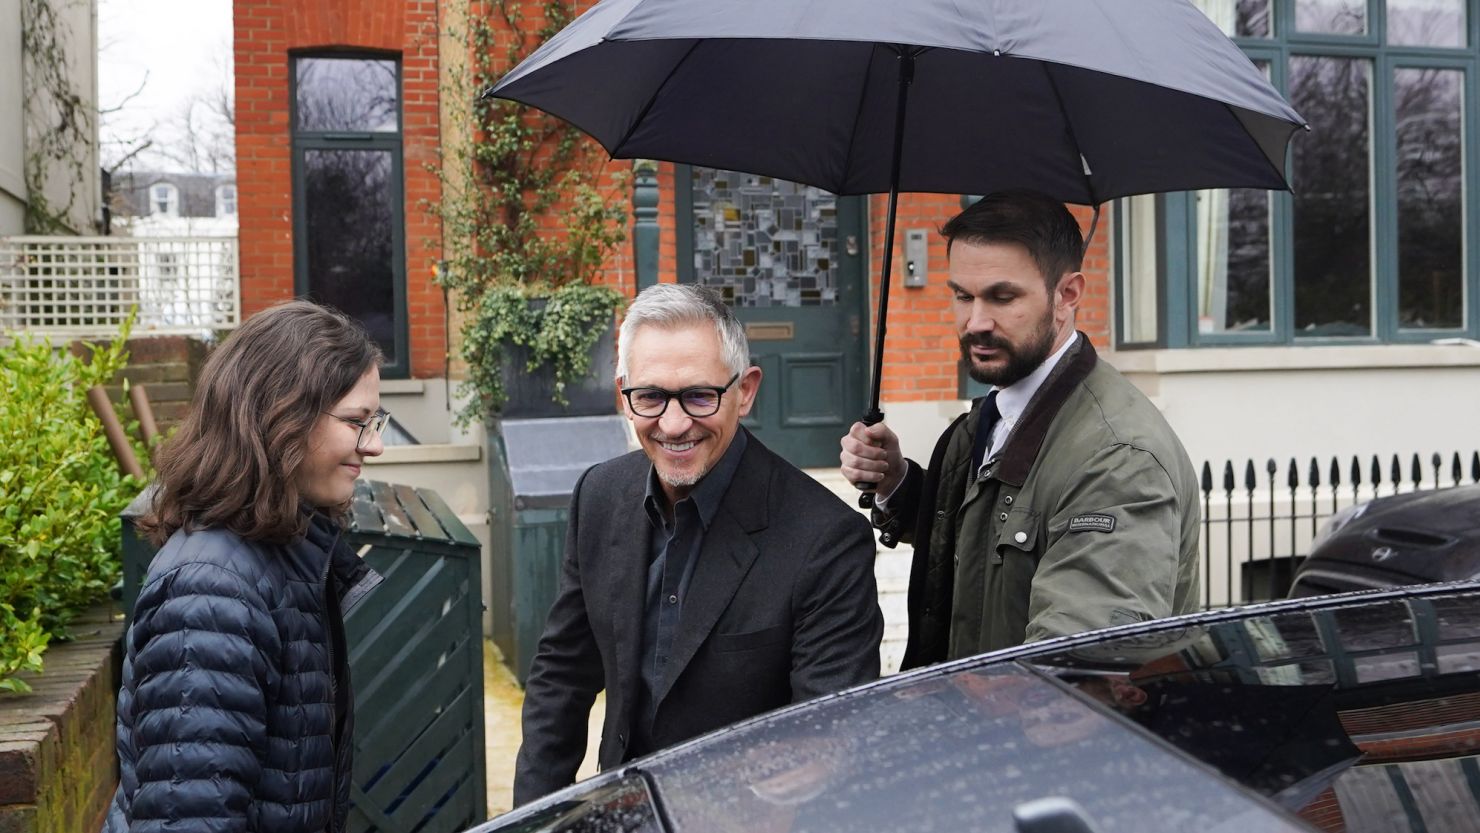 Match Of The Day host Gary Lineker leaves his home in London on Thursday.